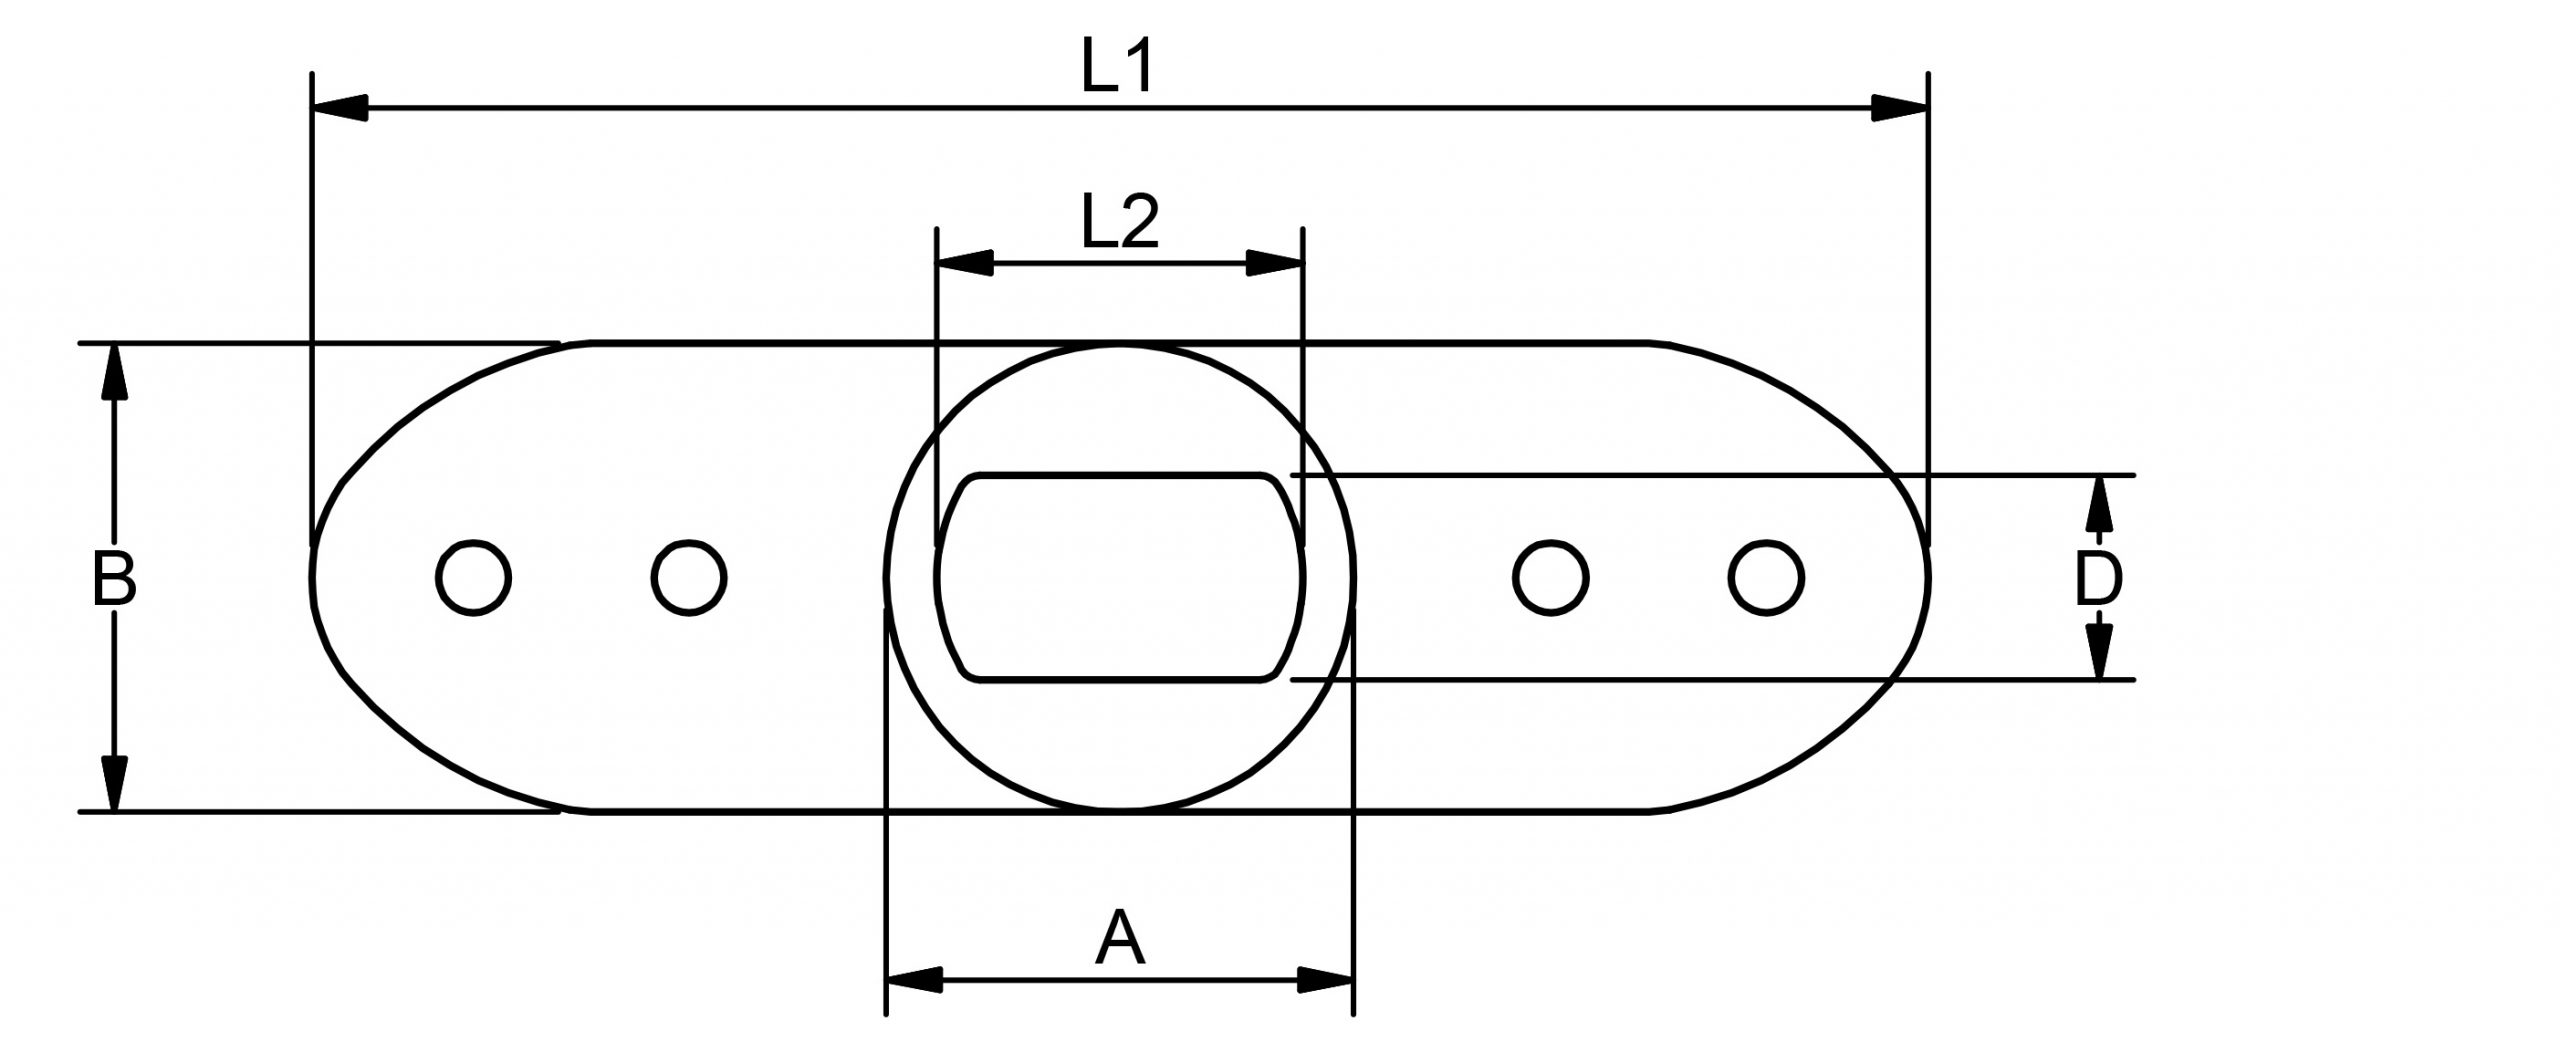 BW6161 Back plate for T-Terminal drawing